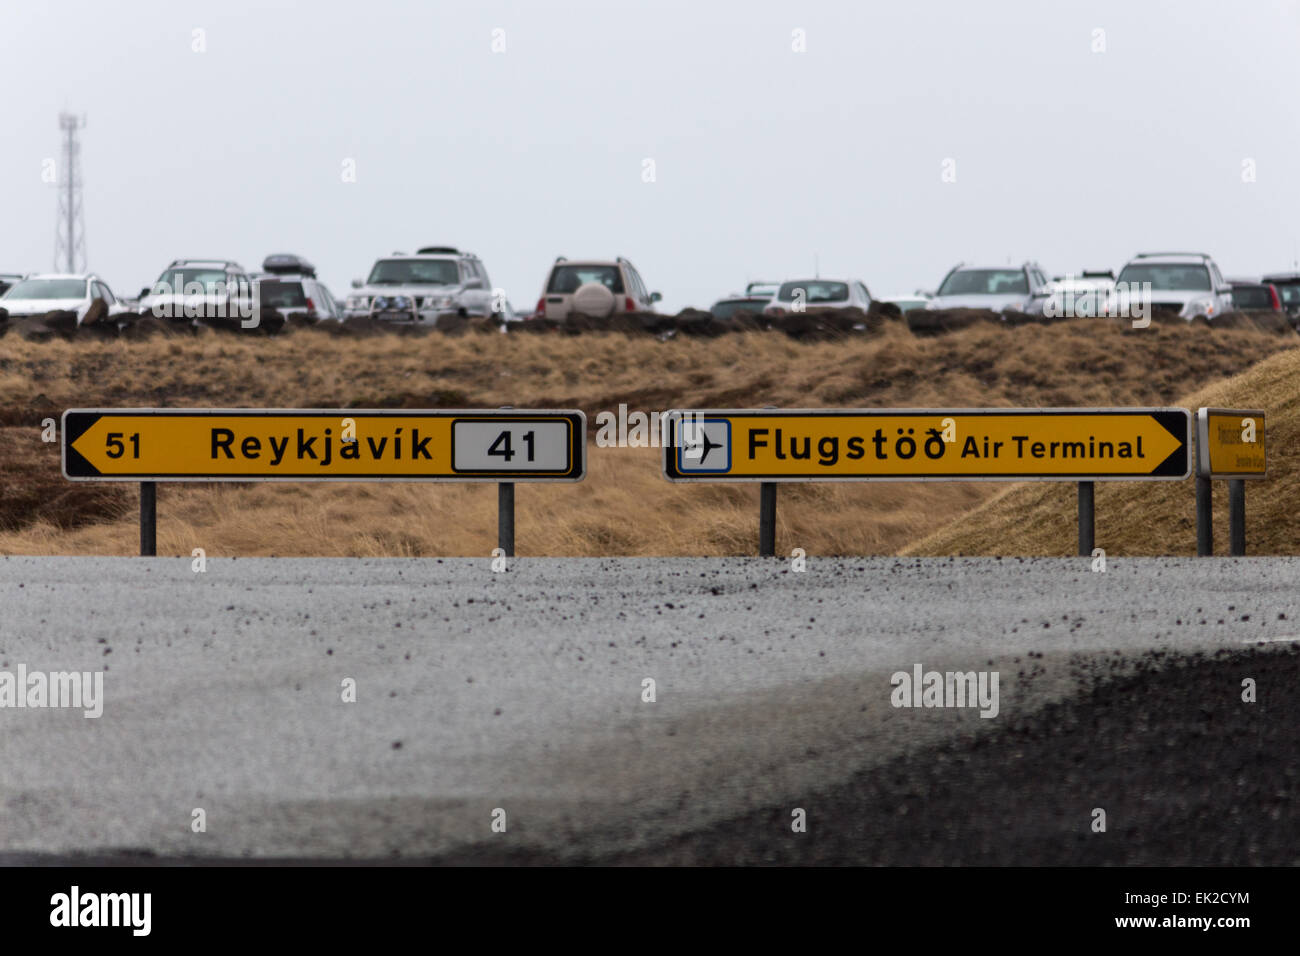 Iceland traffic sign for the airport and Reykjavik Stock Photo